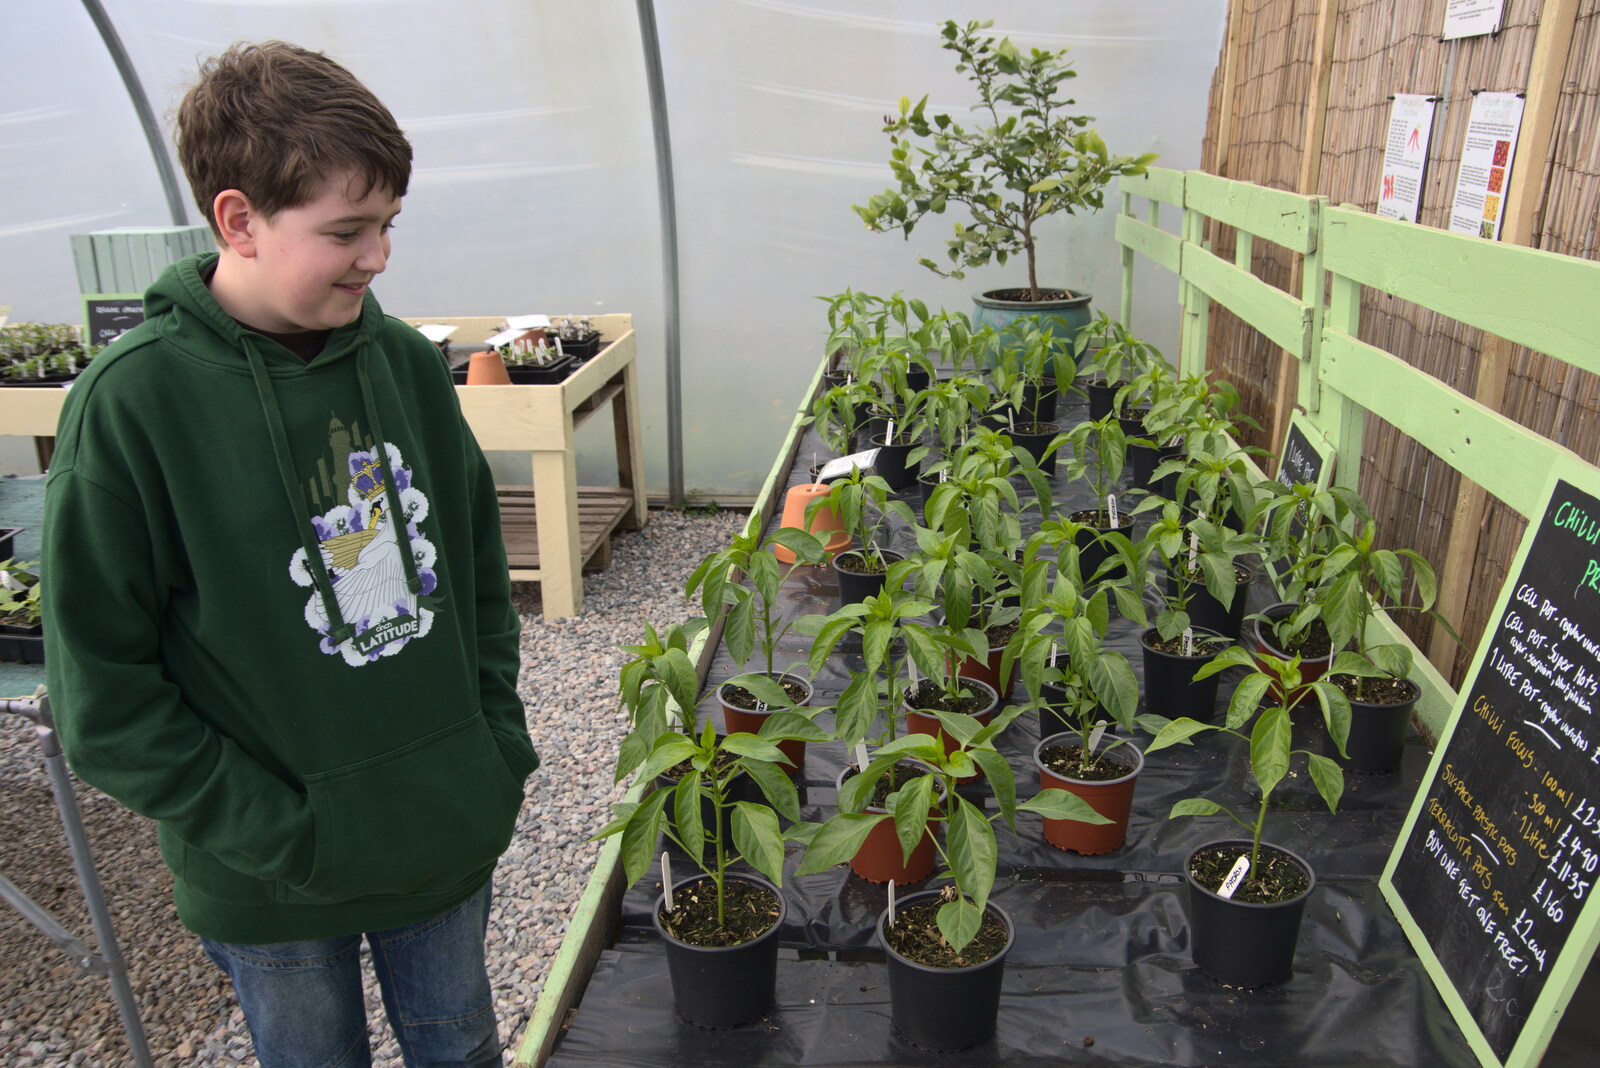 More chillis in the plant nursery from Chilli Farms, Okehampton and the Oxenham Arms, South Zeal, Devon - 10th April 2023